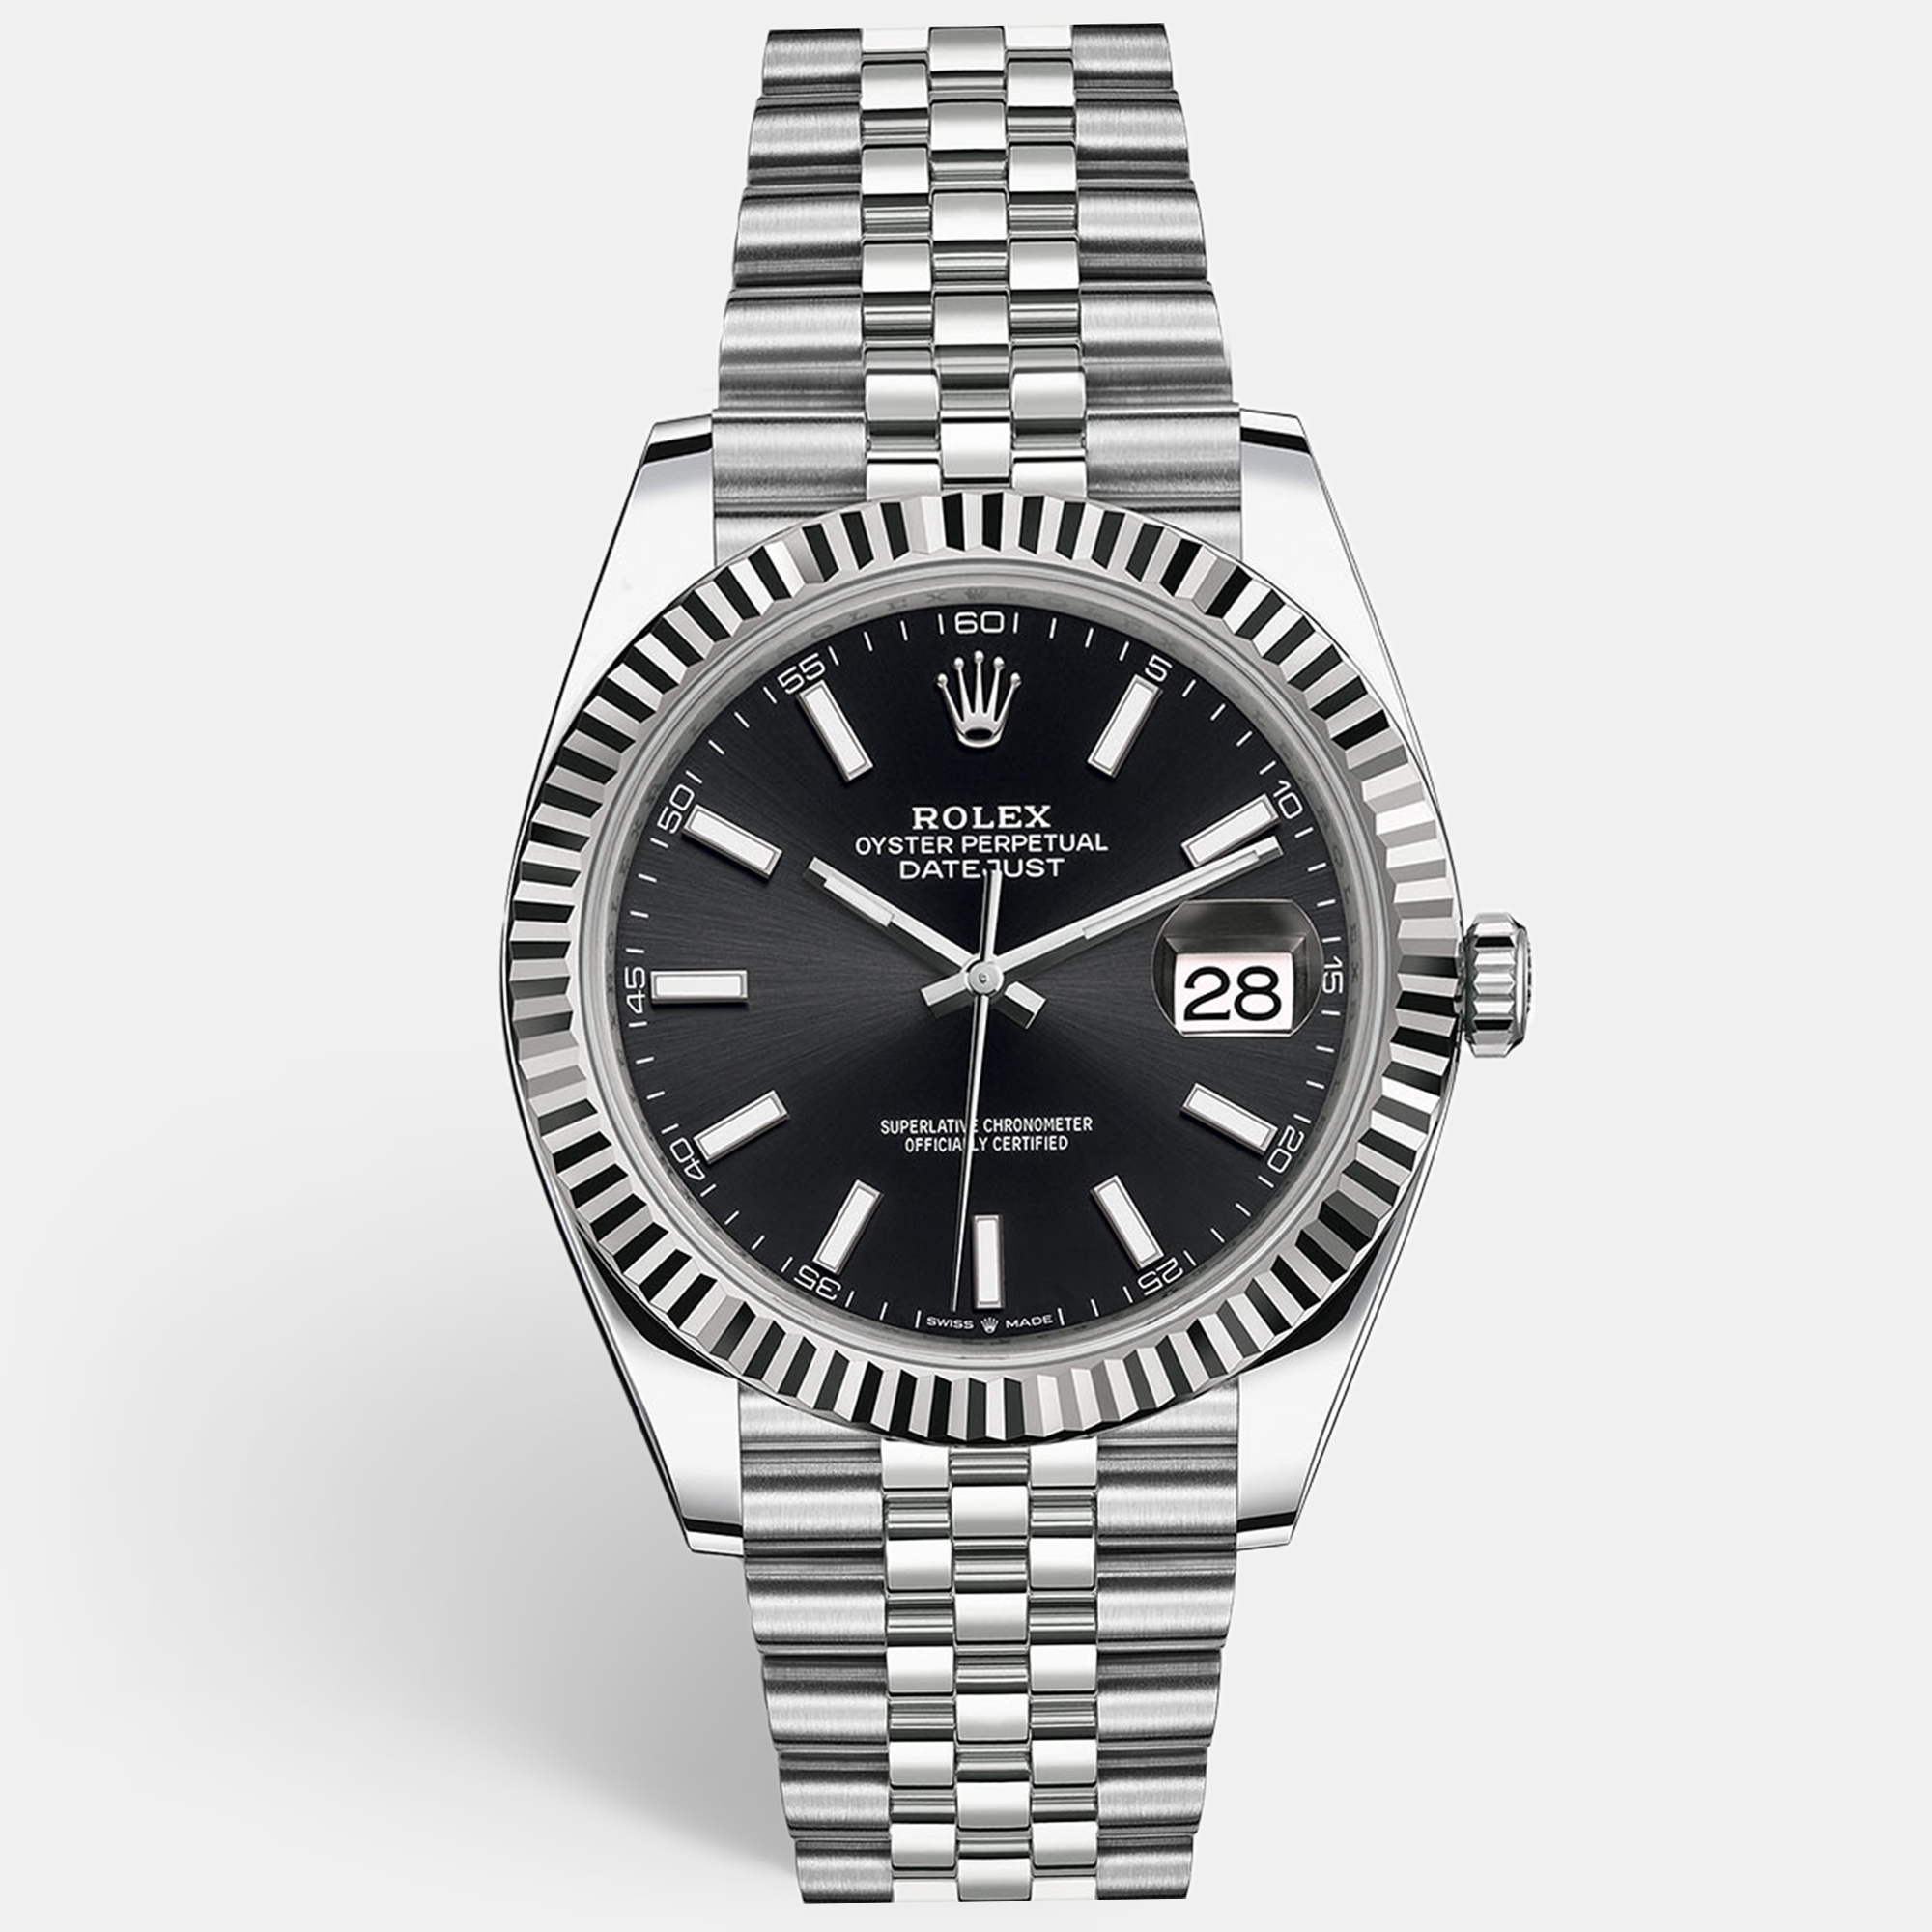 The Datejust is one of the most recognized and coveted watches from the house of Rolex. It has a distinct look and an irrefutable appeal. Crafted in stainless steel and 18k white gold this authentic Rolex Datejust wristwatch has the signature allure.